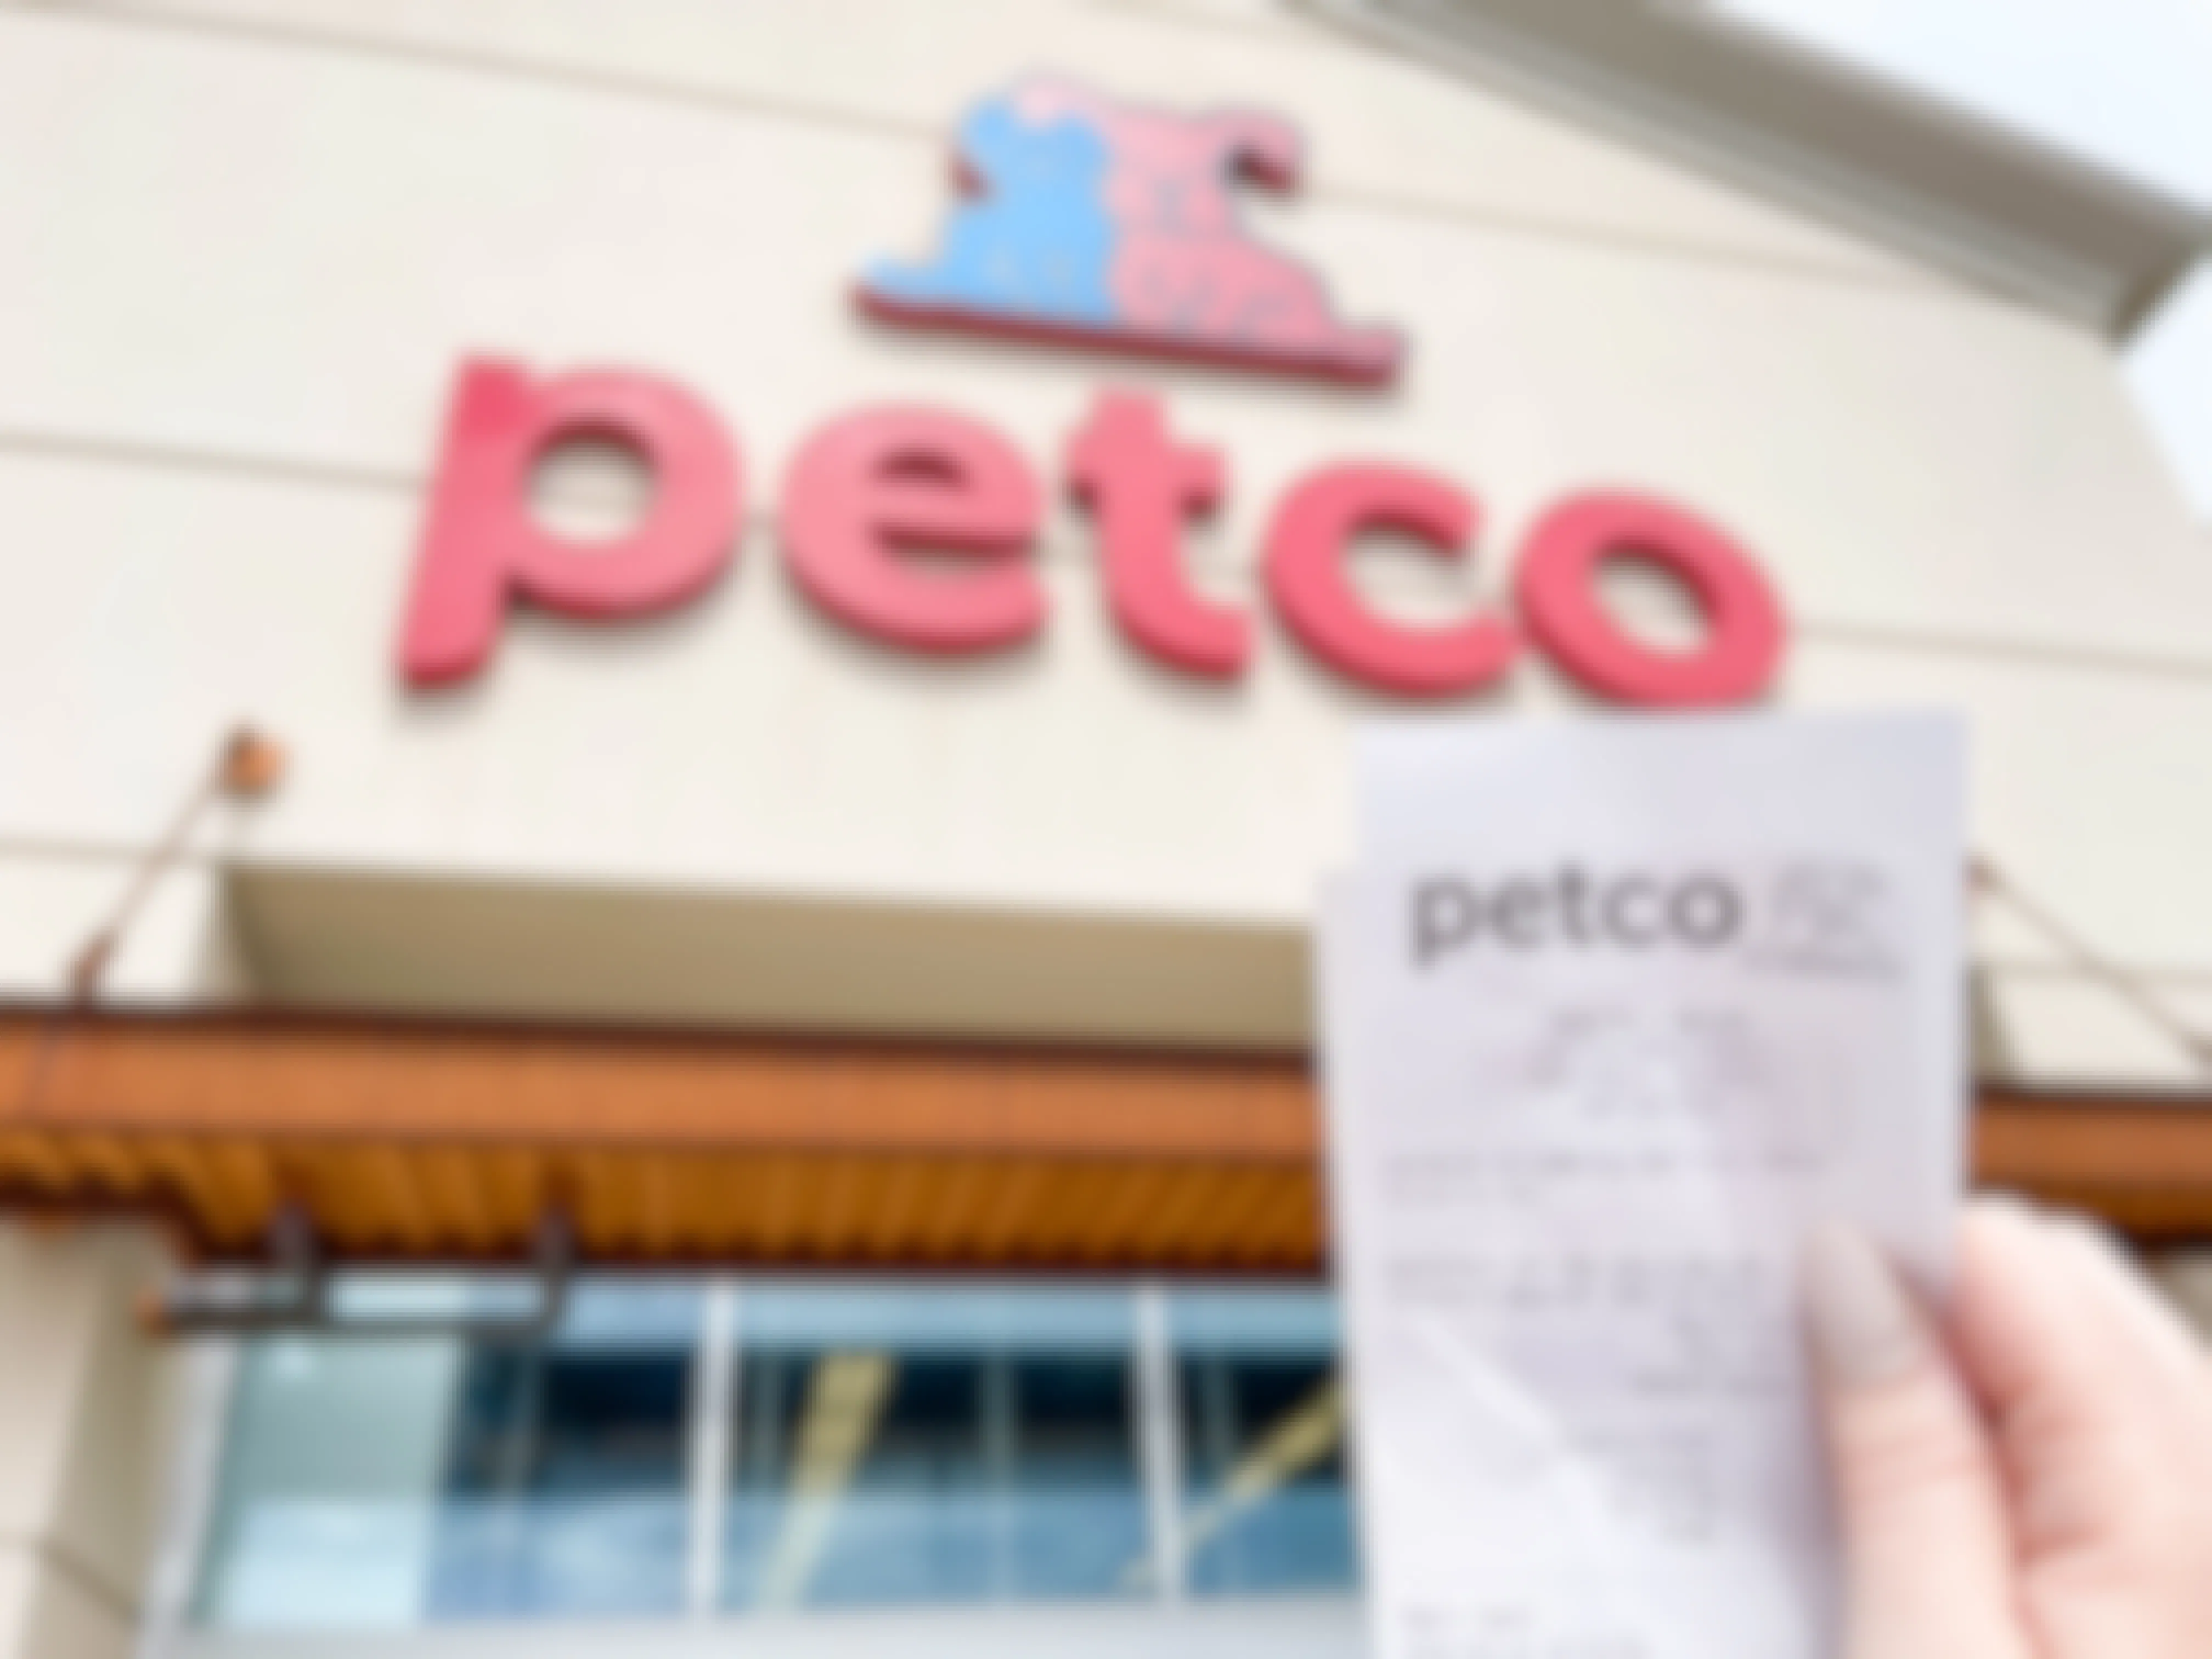 Petco Return Policy: How to Get Your Money Back